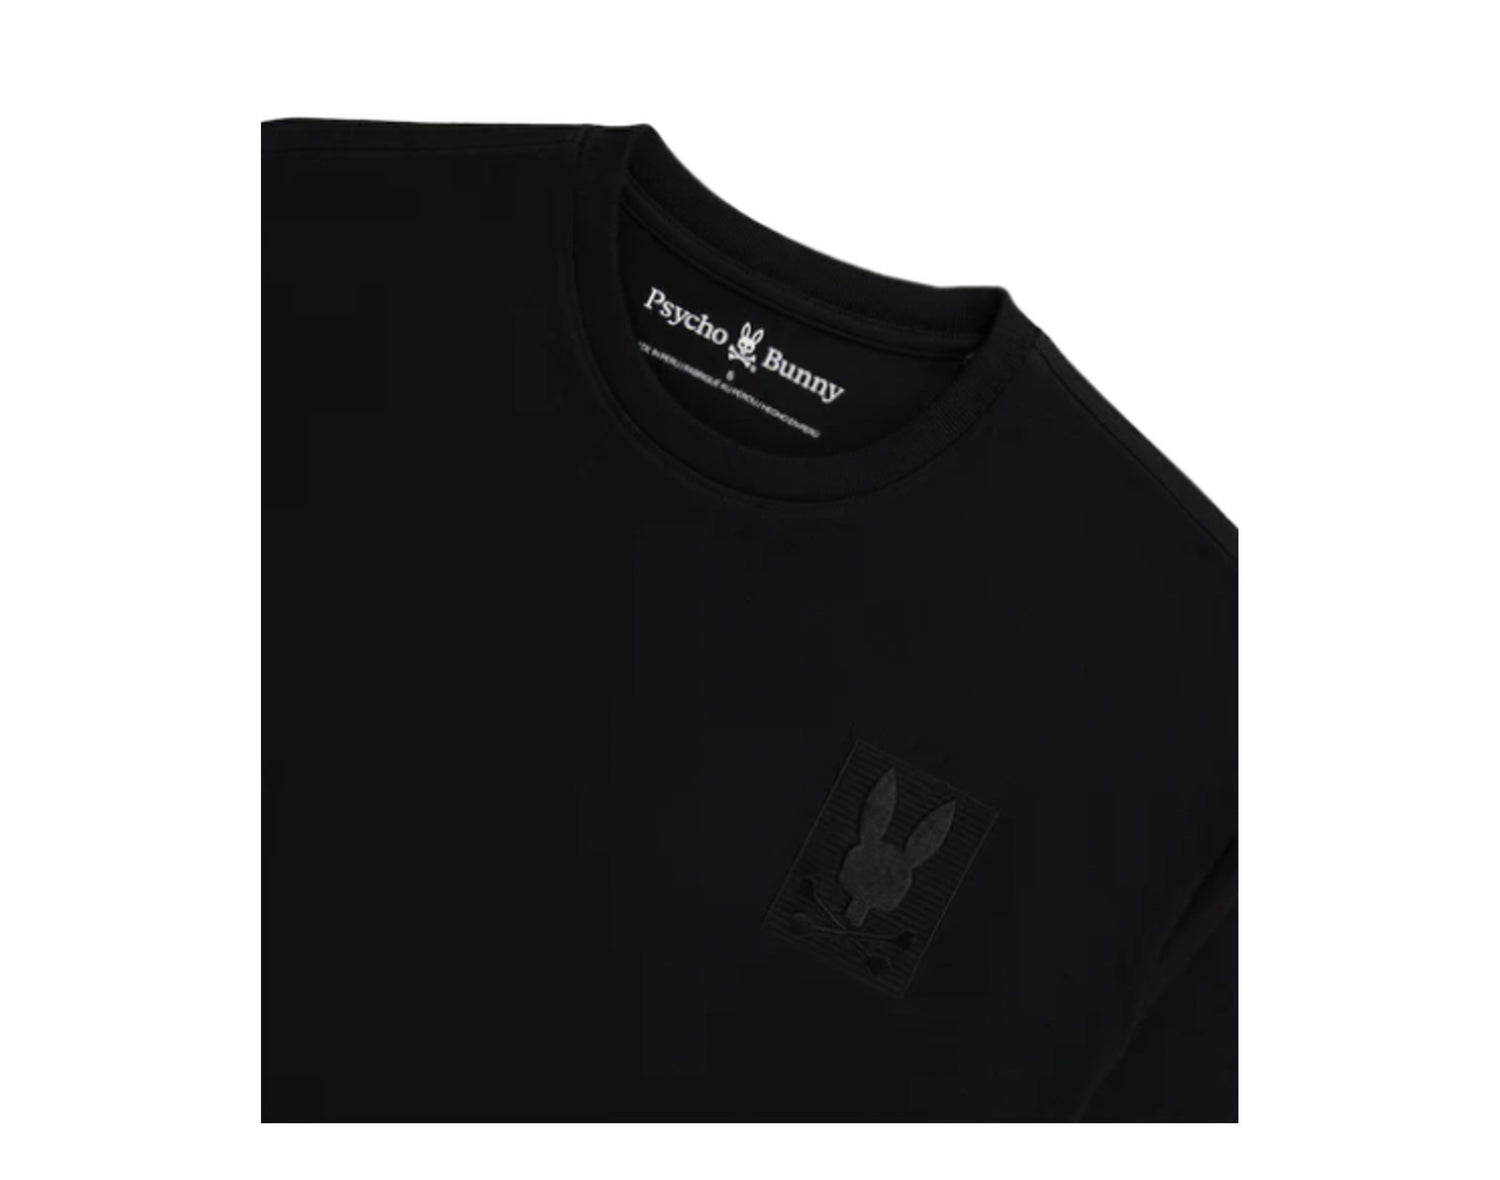 Psycho Bunny Yorkville Heavy Weight Men's Relaxed Fit Tee Shirt